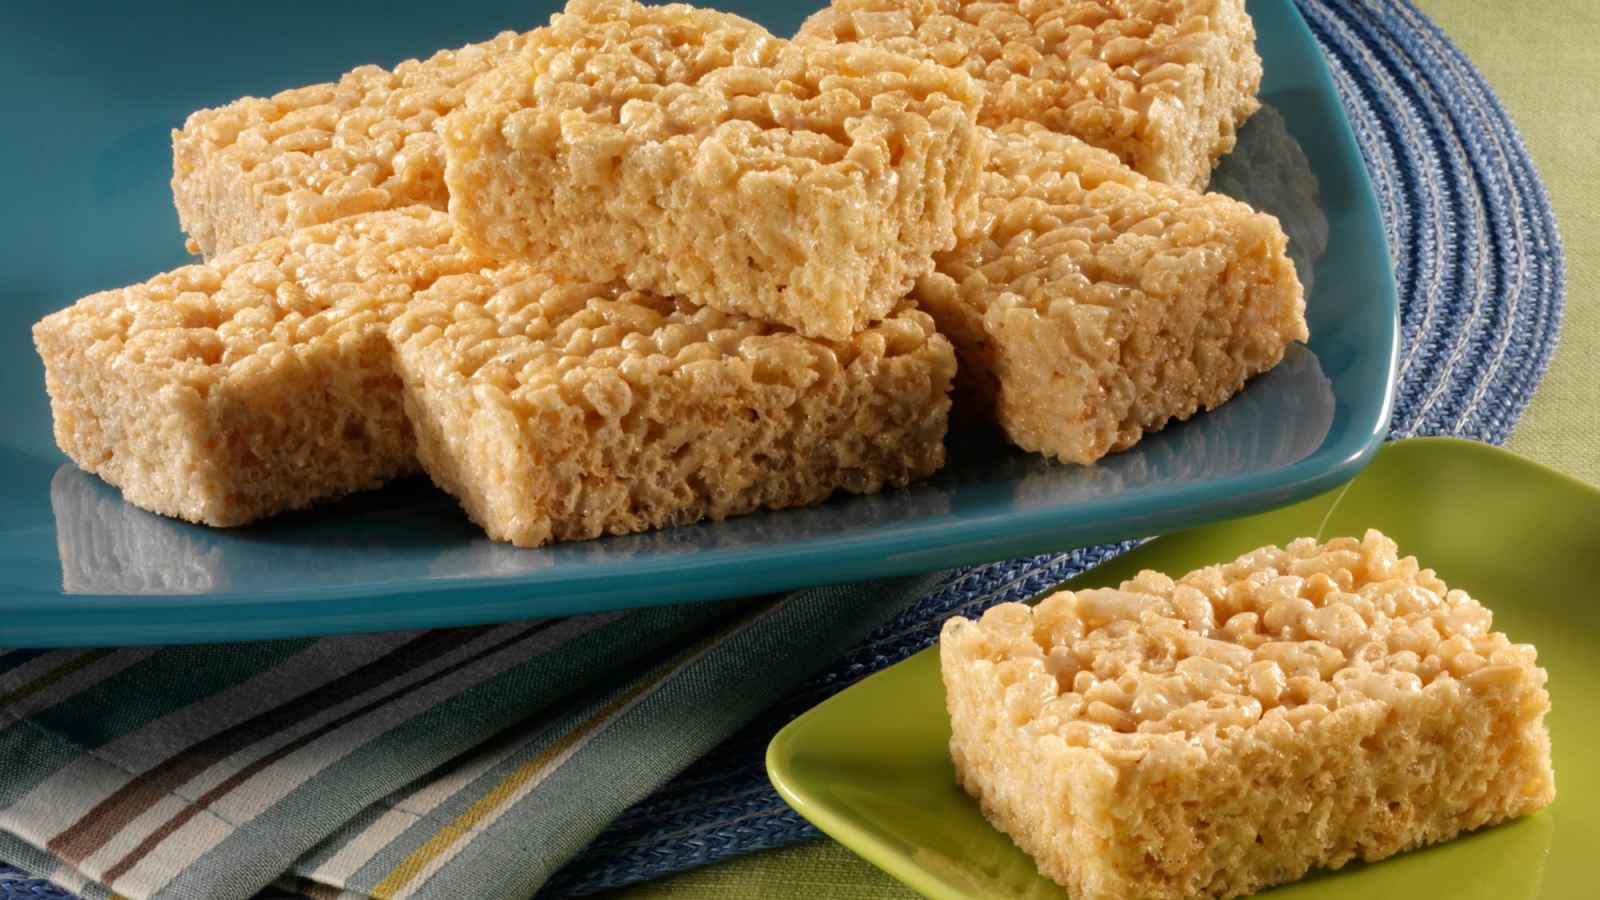 Rice Krispies Treats Day 2023: Date, History, Facts about Puffed Wheat ...